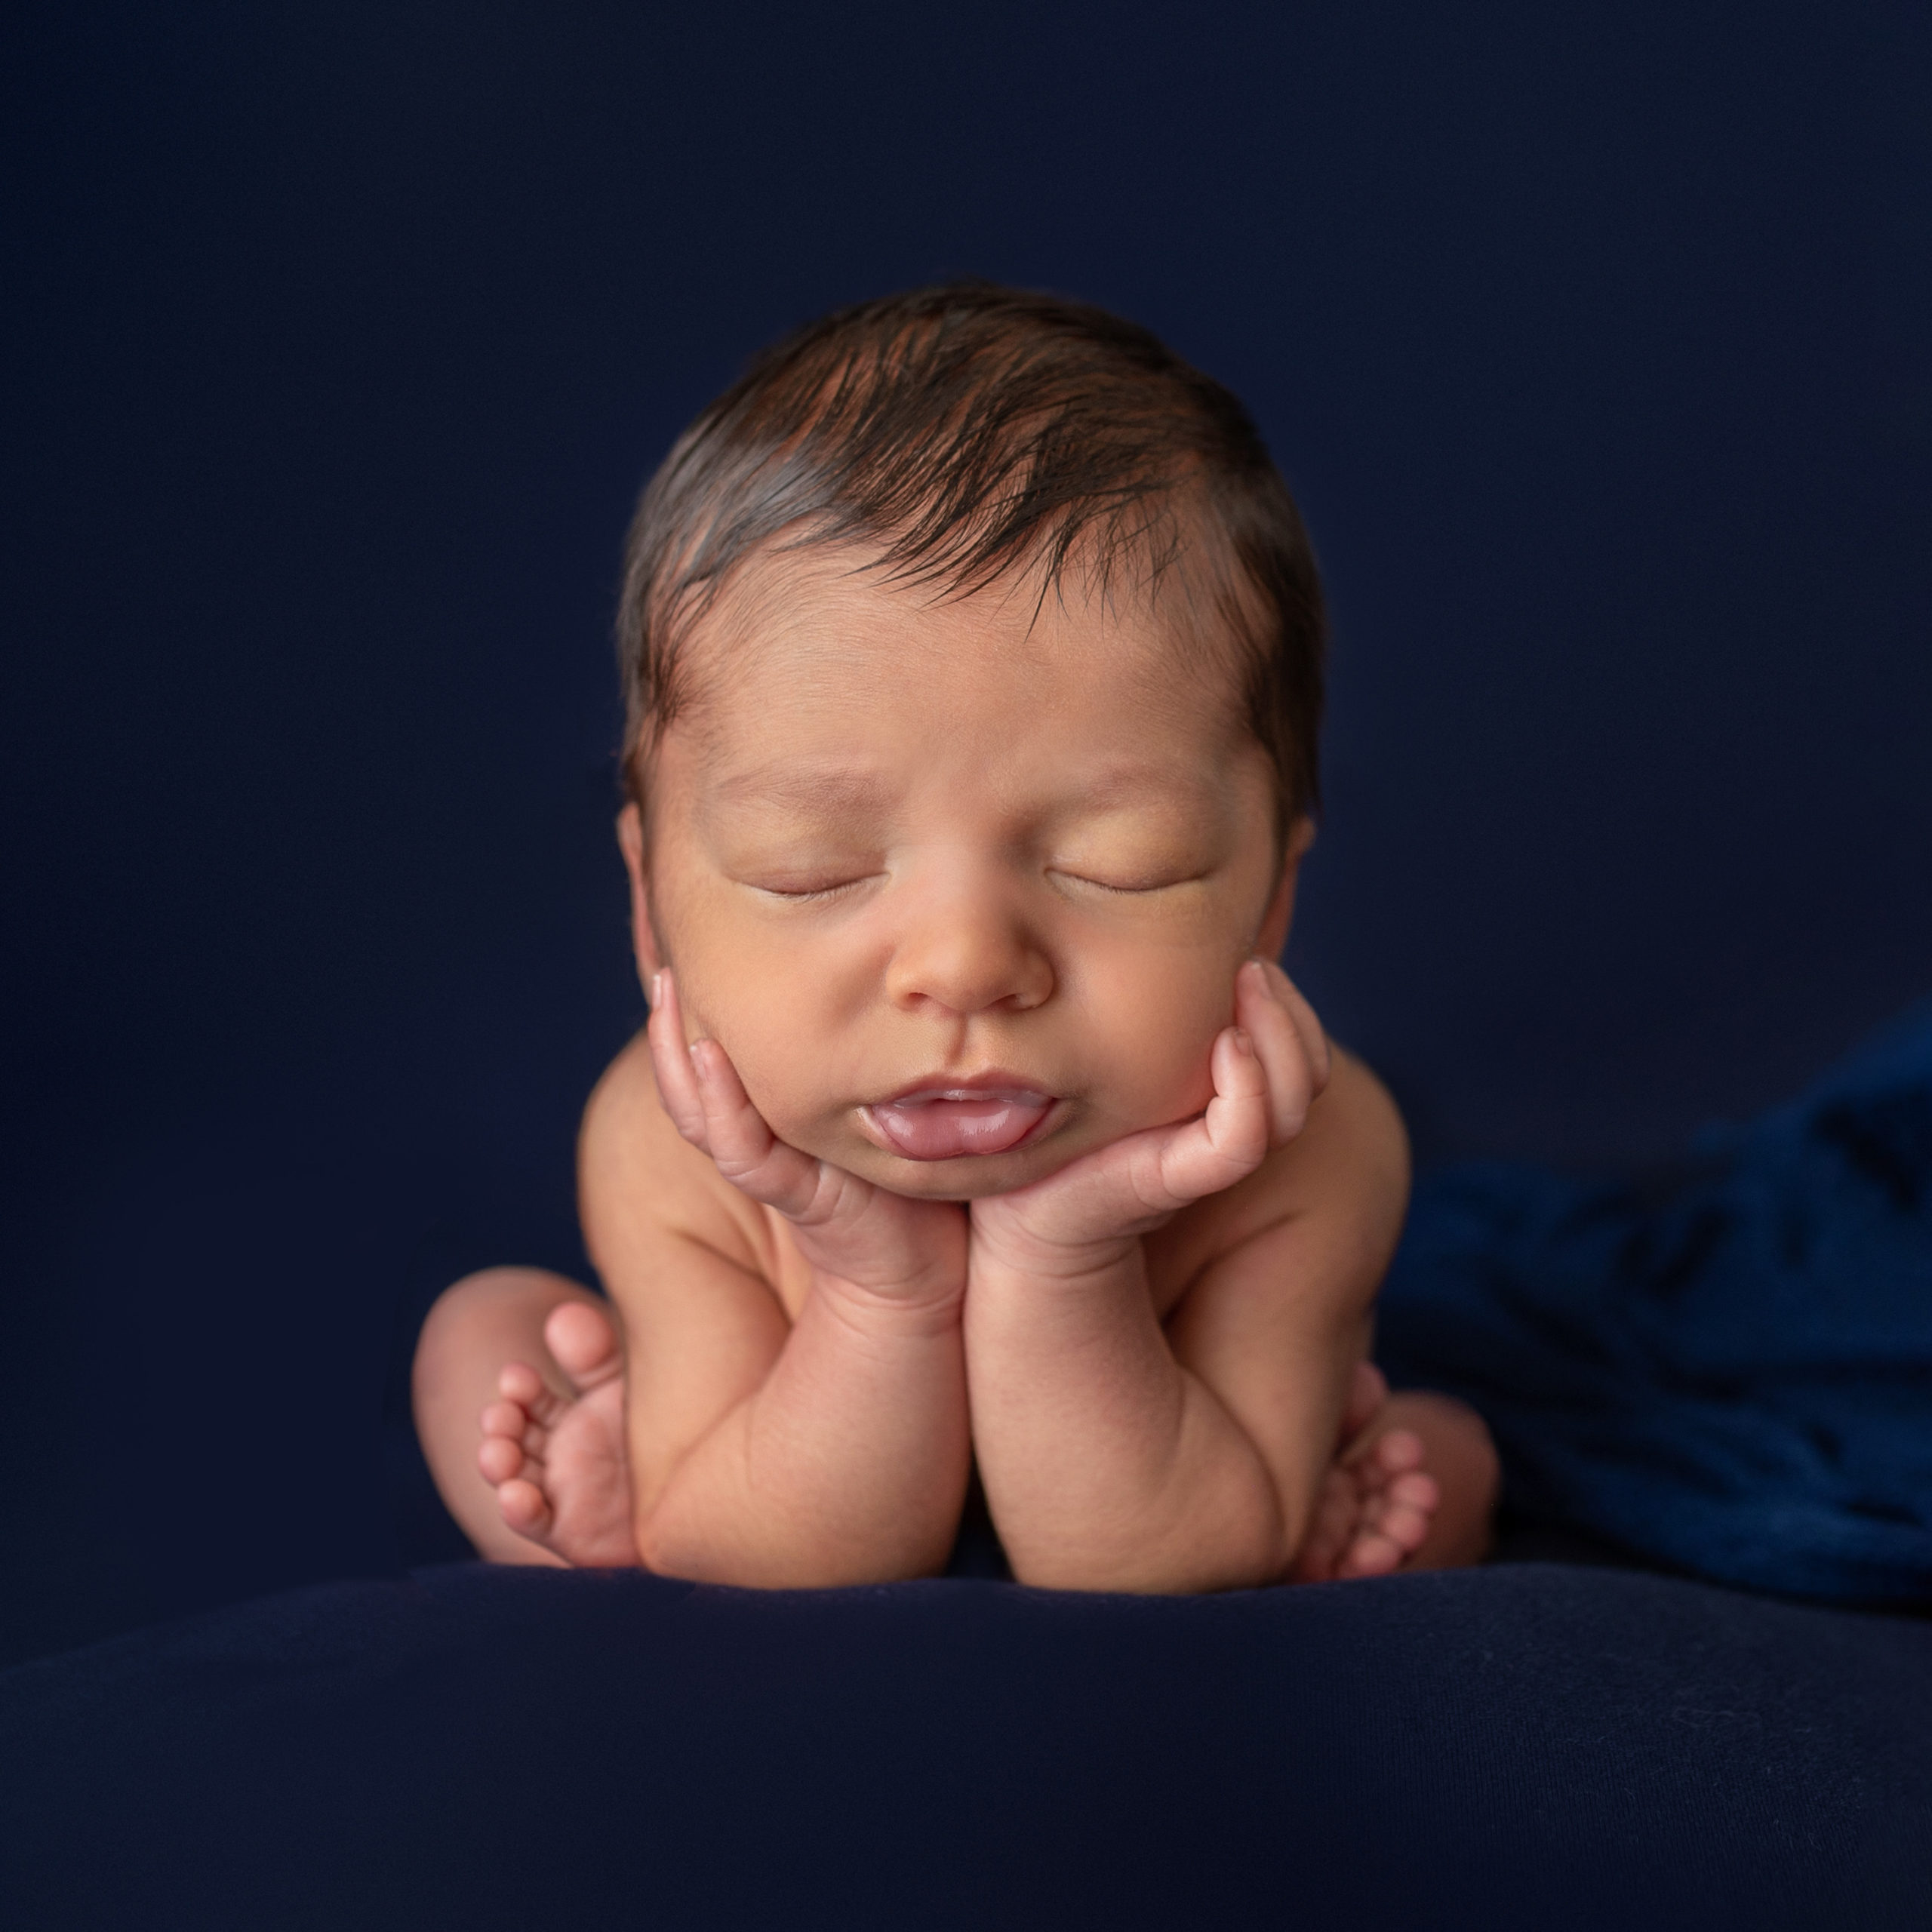 newborn baby in froggy pose with a dark blue backdrop